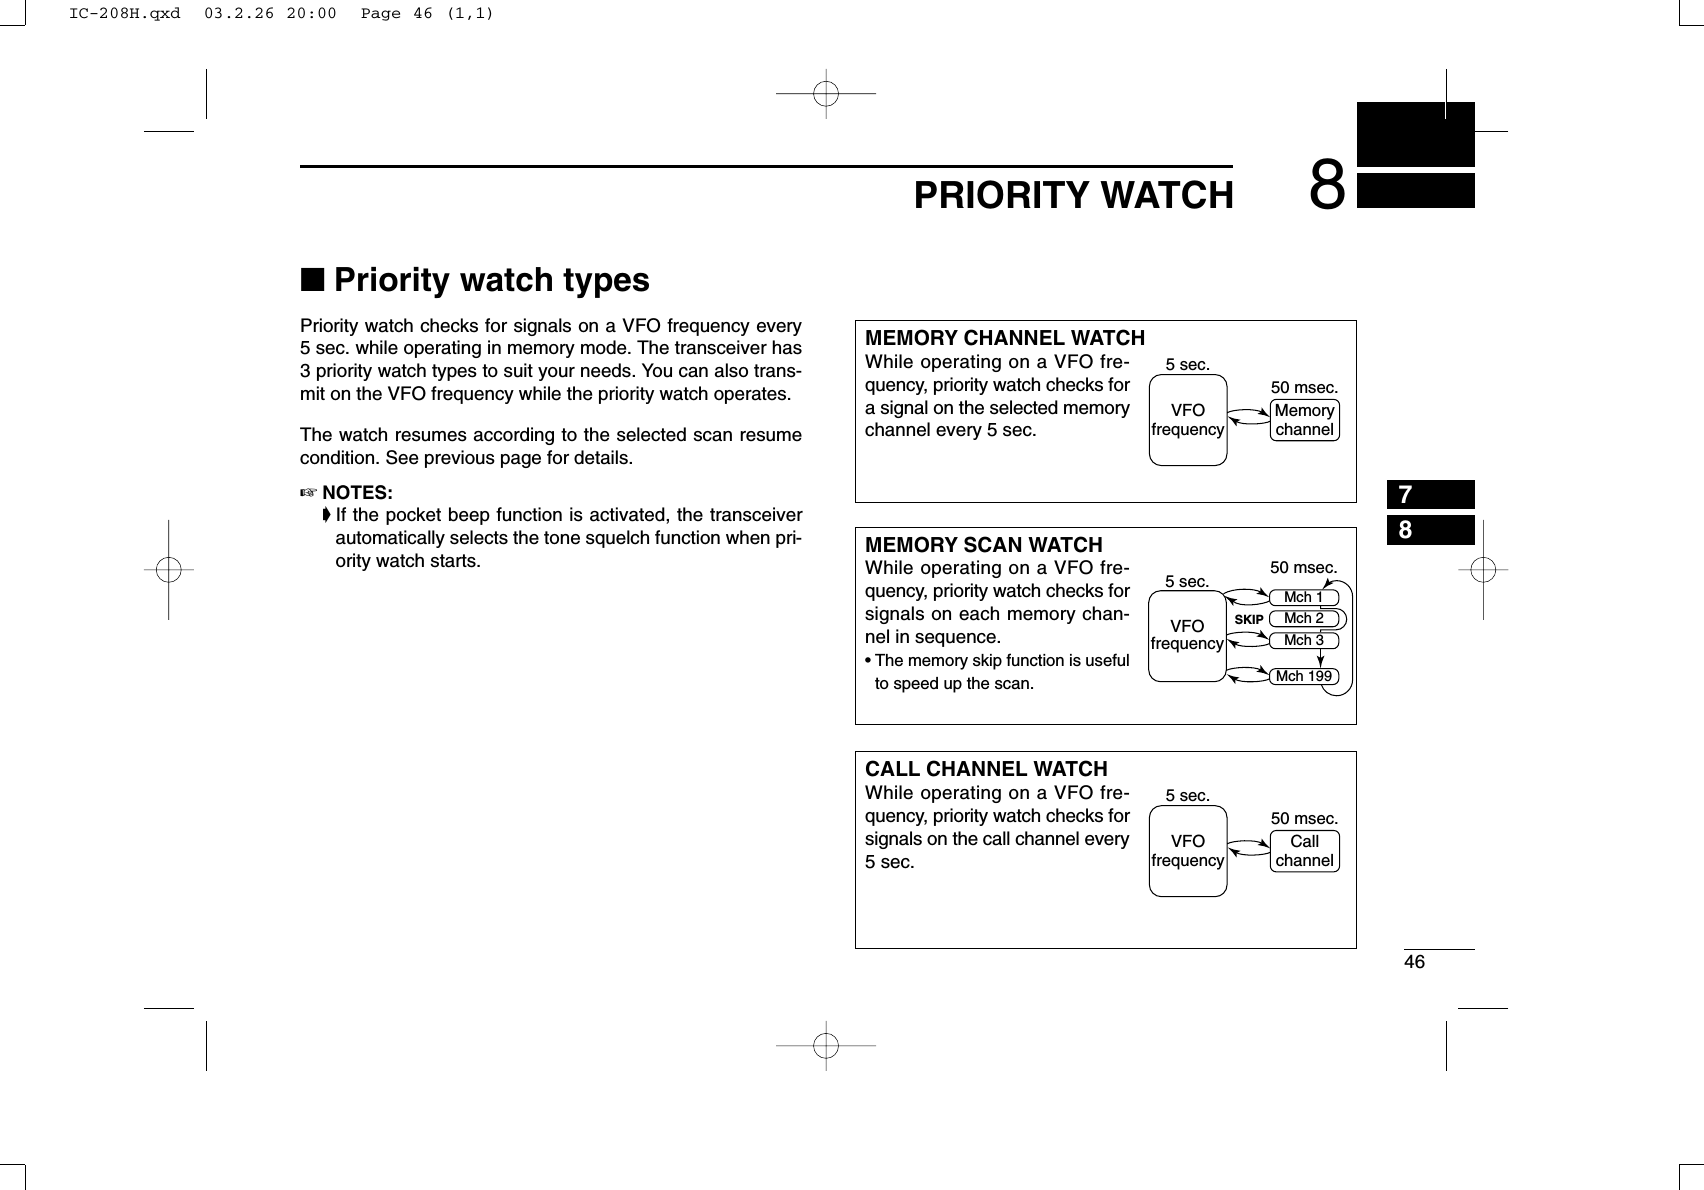 468PRIORITY WATCH78■Priority watch typesPriority watch checks for signals on a VFO frequency every5 sec. while operating in memory mode. The transceiver has3 priority watch types to suit your needs. You can also trans-mit on the VFO frequency while the priority watch operates.The watch resumes according to the selected scan resumecondition. See previous page for details.☞NOTES:➧If the pocket beep function is activated, the transceiverautomatically selects the tone squelch function when pri-ority watch starts.MEMORY CHANNEL WATCHWhile operating on a VFO fre-quency, priority watch checks fora signal on the selected memorychannel every 5 sec.MEMORY SCAN WATCHWhile operating on a VFO fre-quency, priority watch checks forsignals on each memory chan-nel in sequence.•The memory skip function is usefulto speed up the scan.CALL CHANNEL WATCHWhile operating on a VFO fre-quency, priority watch checks forsignals on the call channel every5 sec.5 sec.VFOfrequency50 msec.Memorychannel5 sec. 50 msec.VFOfrequencySKIPMch 1Mch 2Mch 3Mch 1995 sec.VFOfrequency50 msec.CallchannelIC-208H.qxd  03.2.26 20:00  Page 46 (1,1)